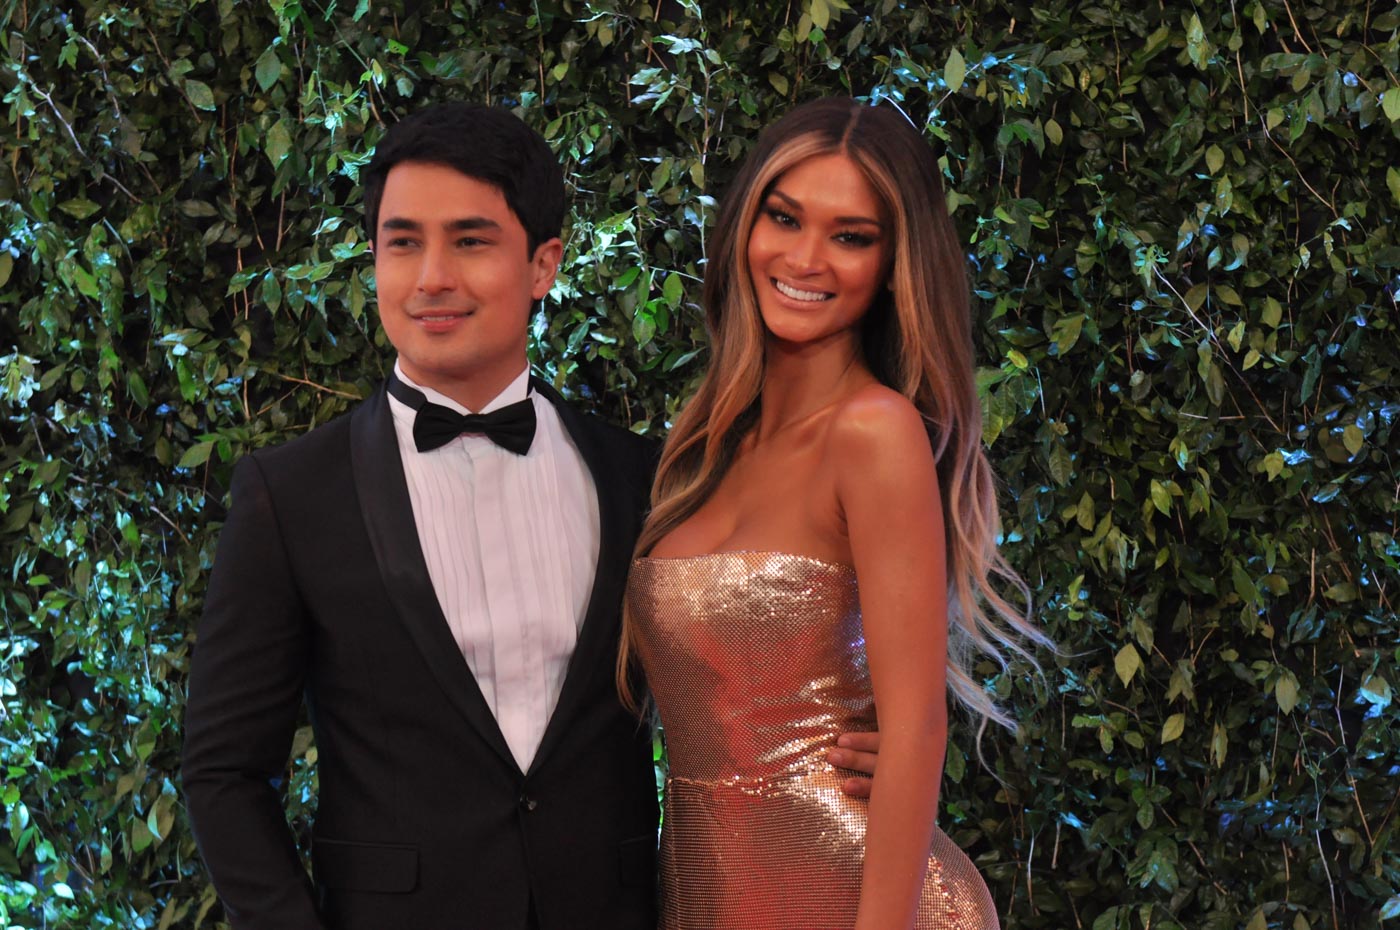 BALL DATE. Marlon Stockinger and Pia Wurtzbach walk the ABS-CBN Ball red carpet together in September 2018. File photo by Jay Ganzon/Rappler 